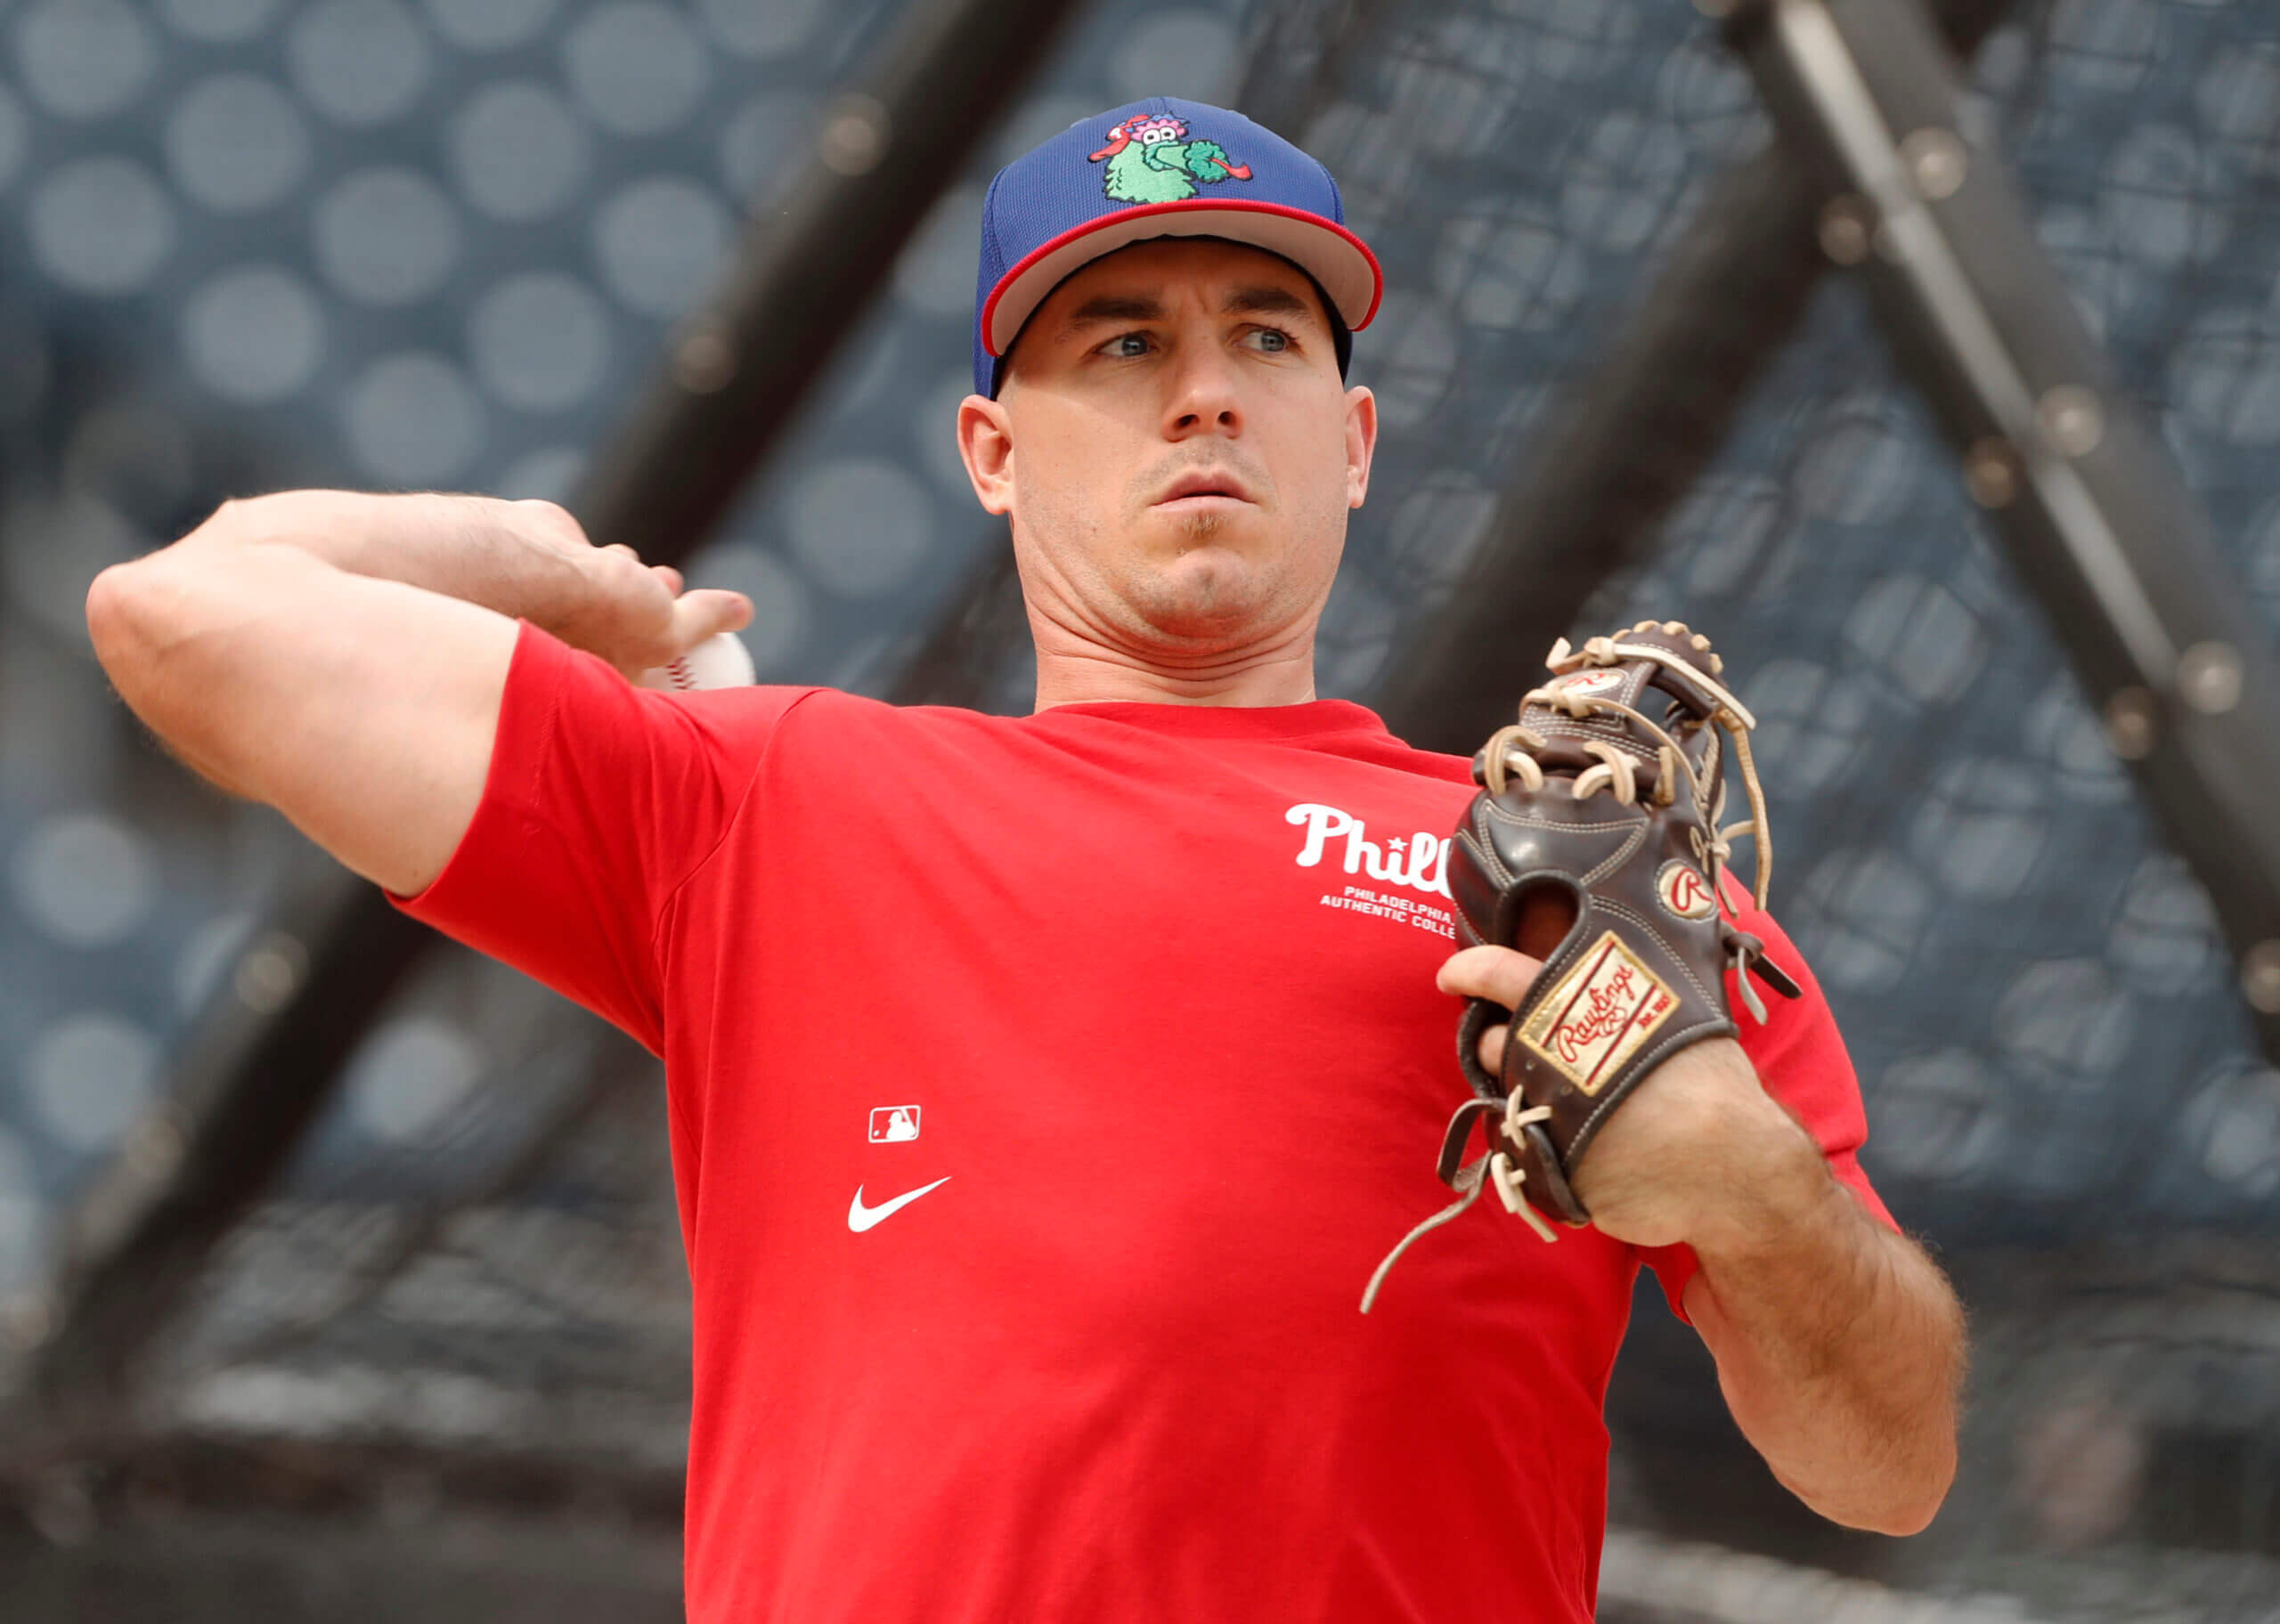 J.T. Realmuto is back, and the Phillies will feel his presence in obvious and subtle ways